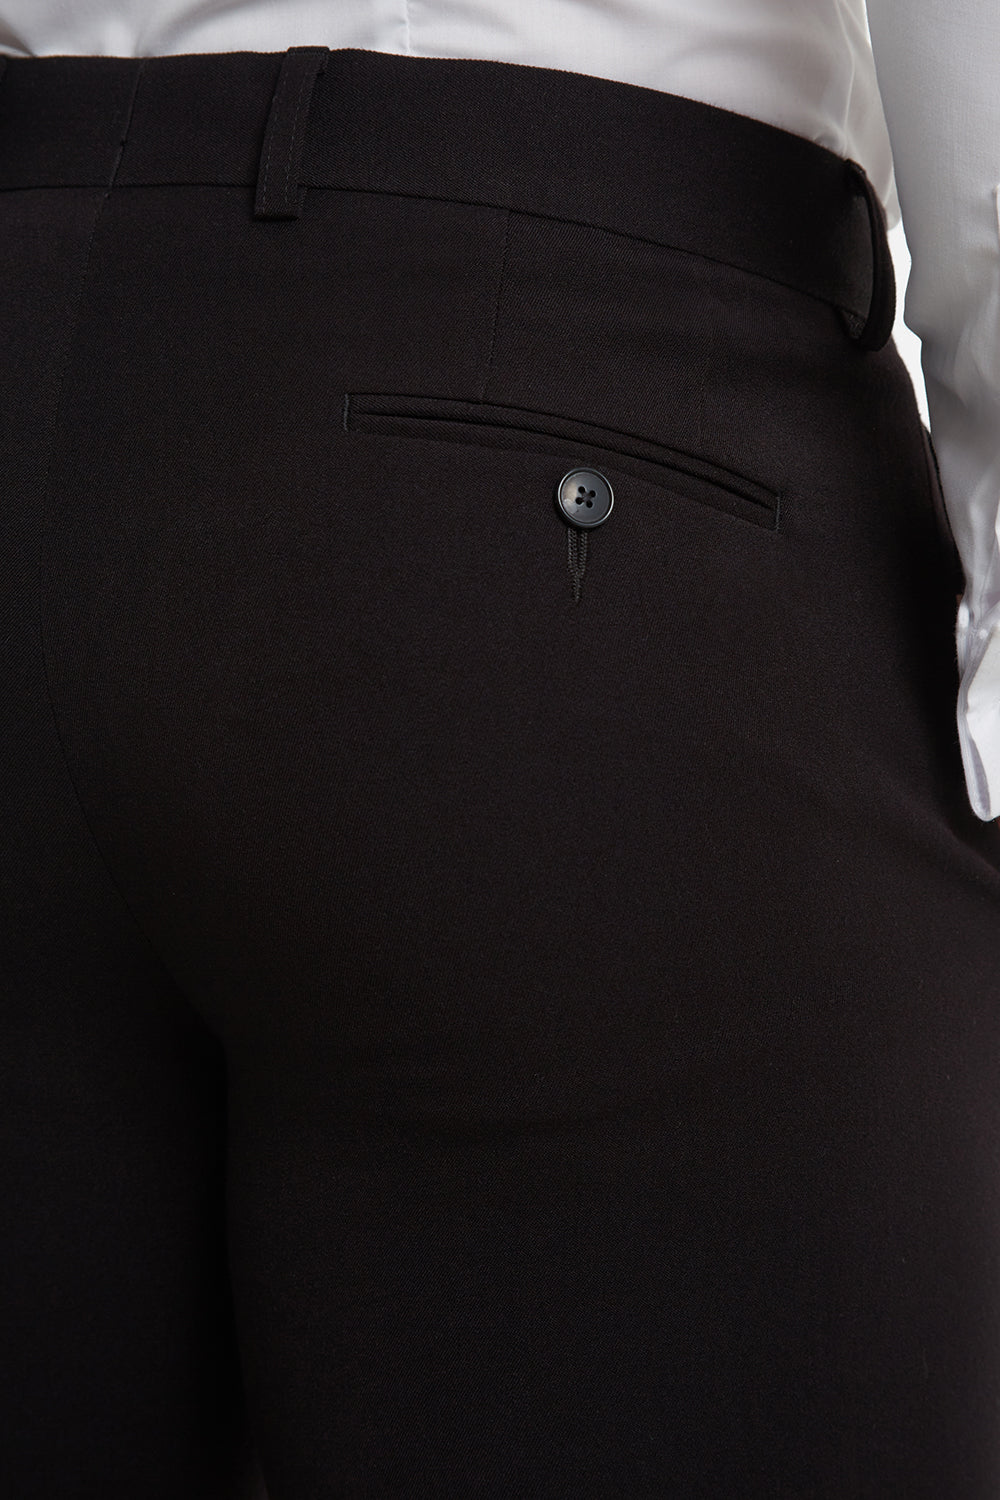 365 Pants in Black - TAILORED ATHLETE - USA